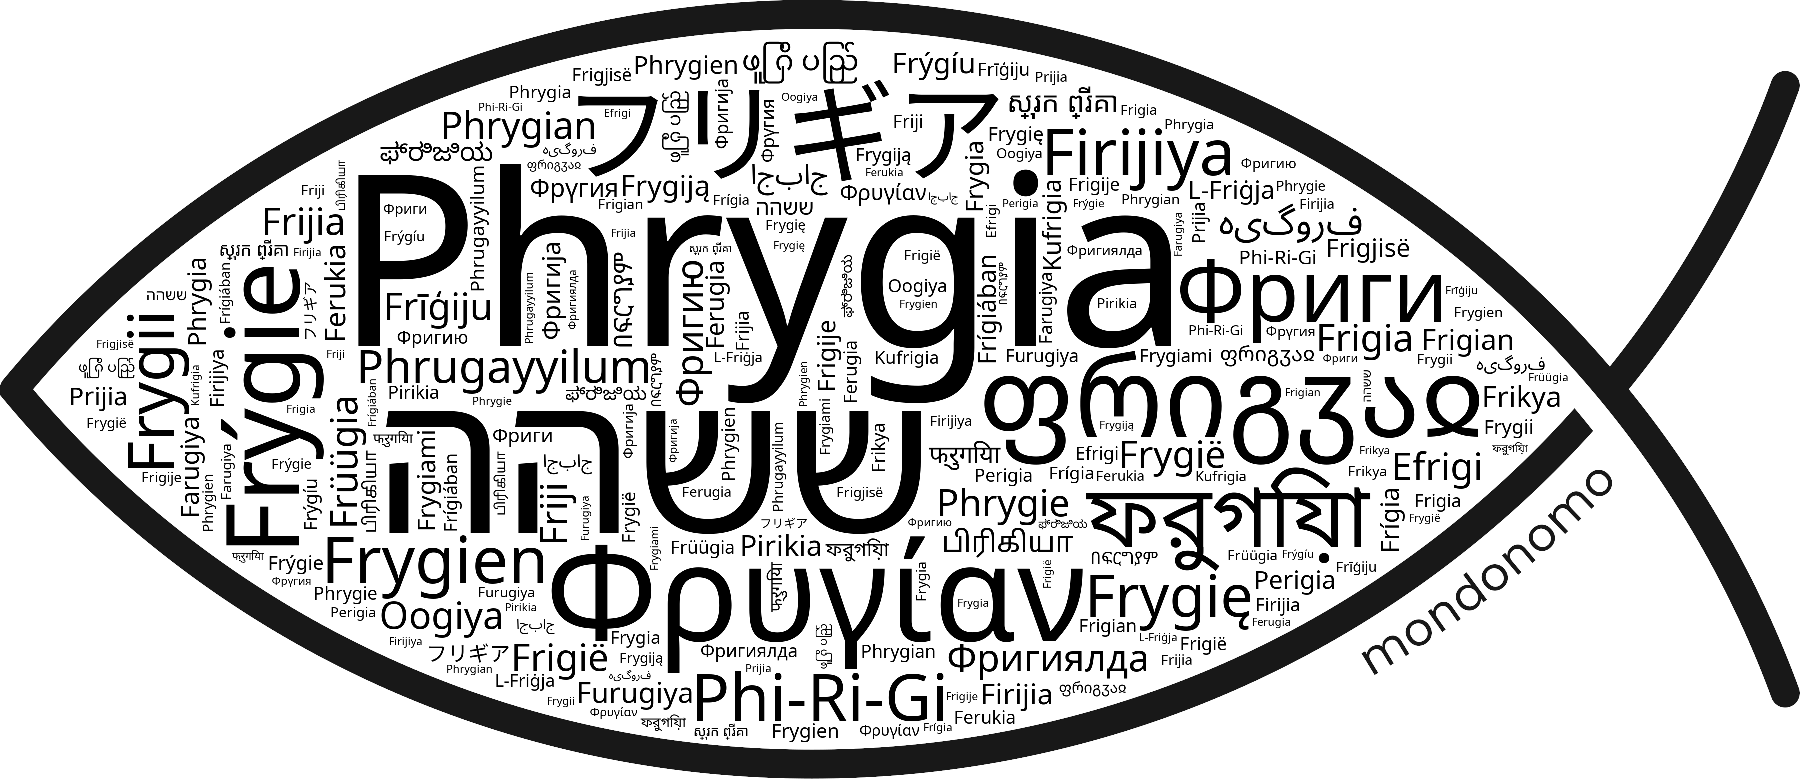 Name Phrygia in the world's Bibles